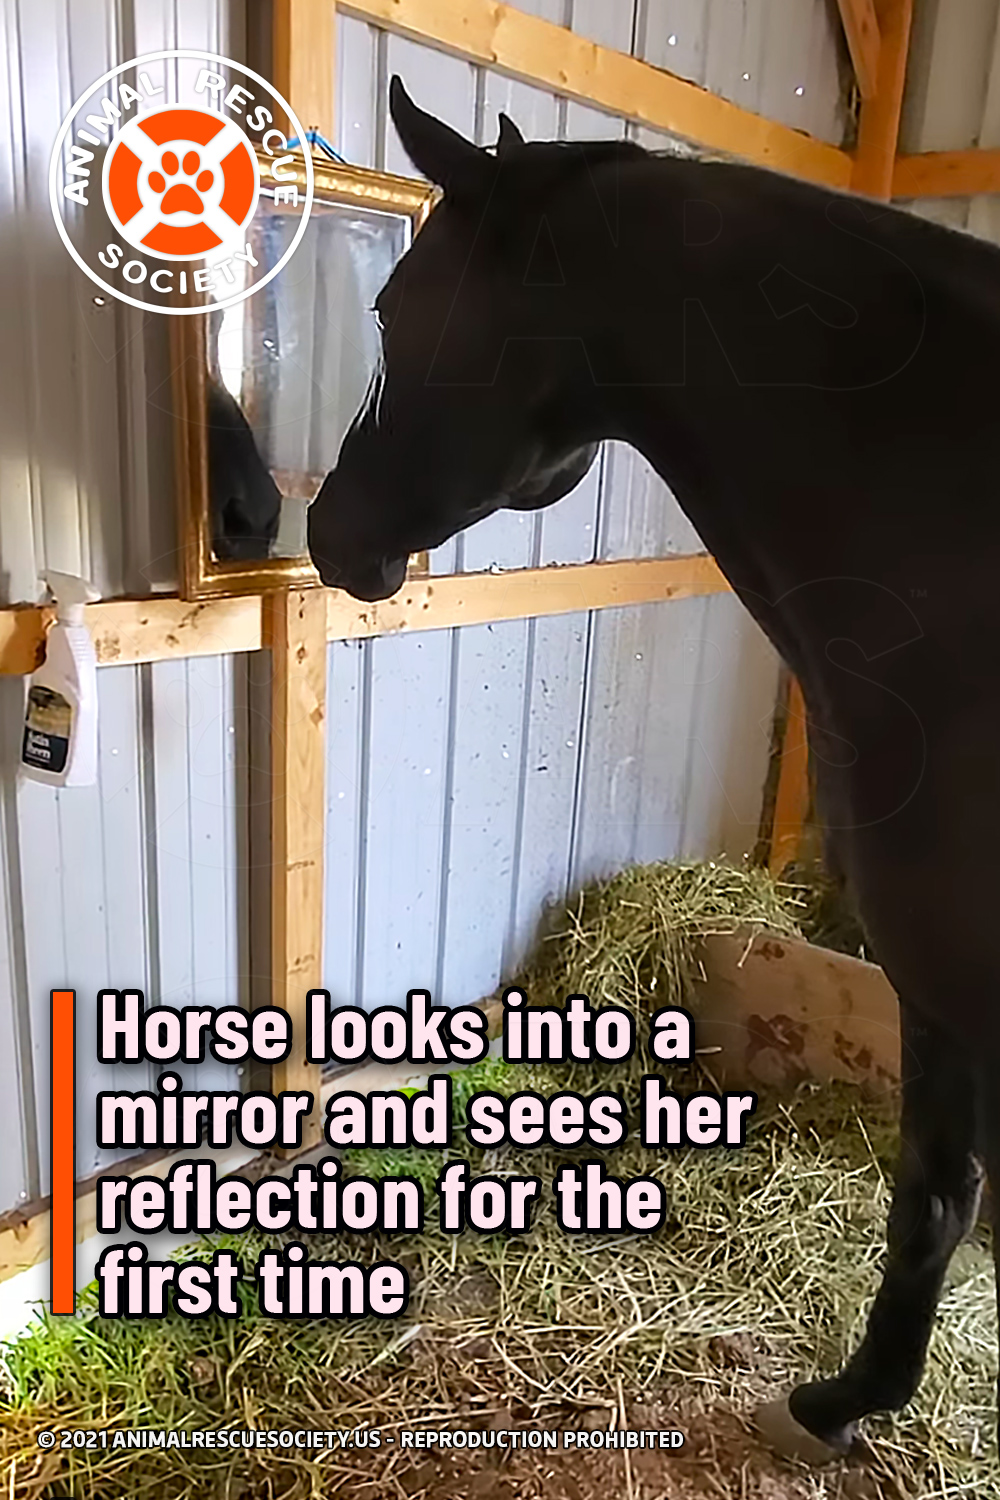 Horse looks into a mirror and sees her reflection for the first time